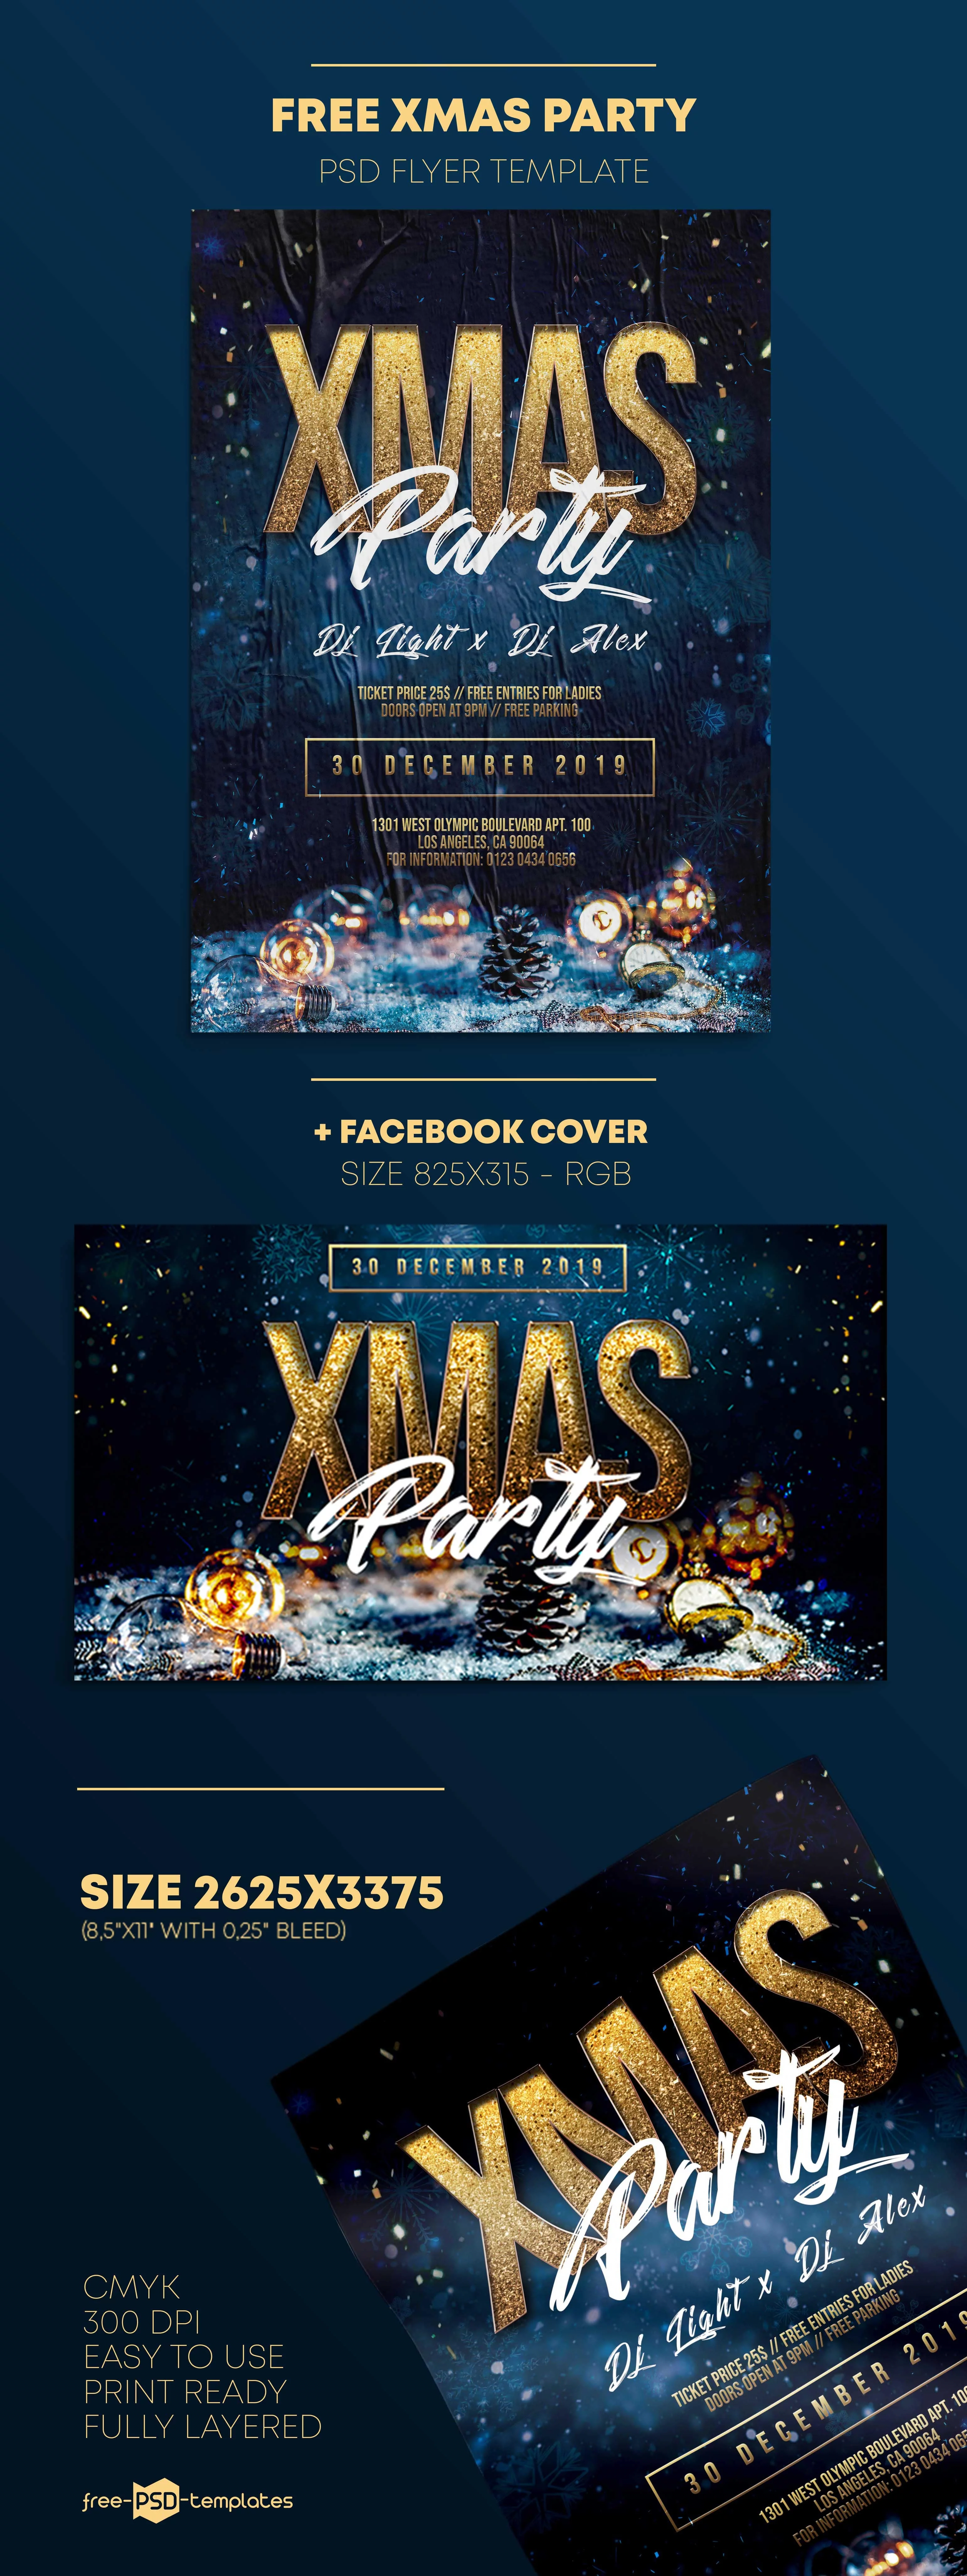 Free XMas Party Flyer Template in PSD